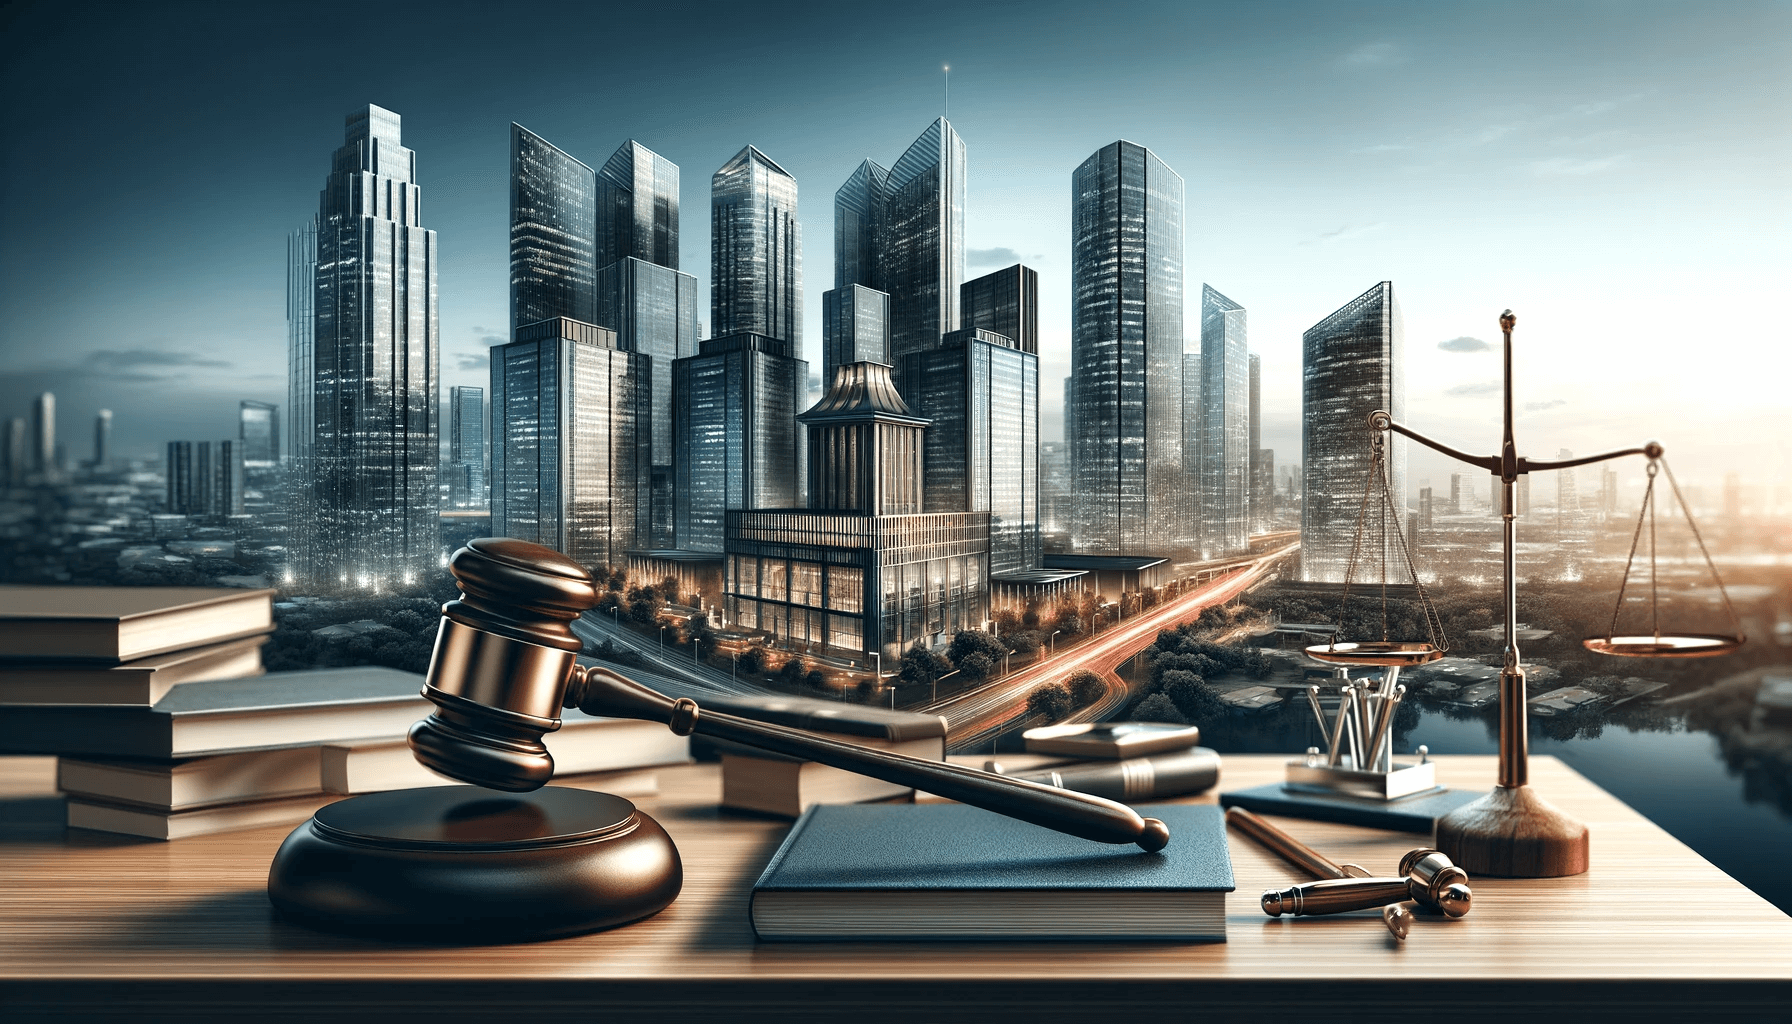 Image with a desk, gavel, balance scales, and a modern city landscape 